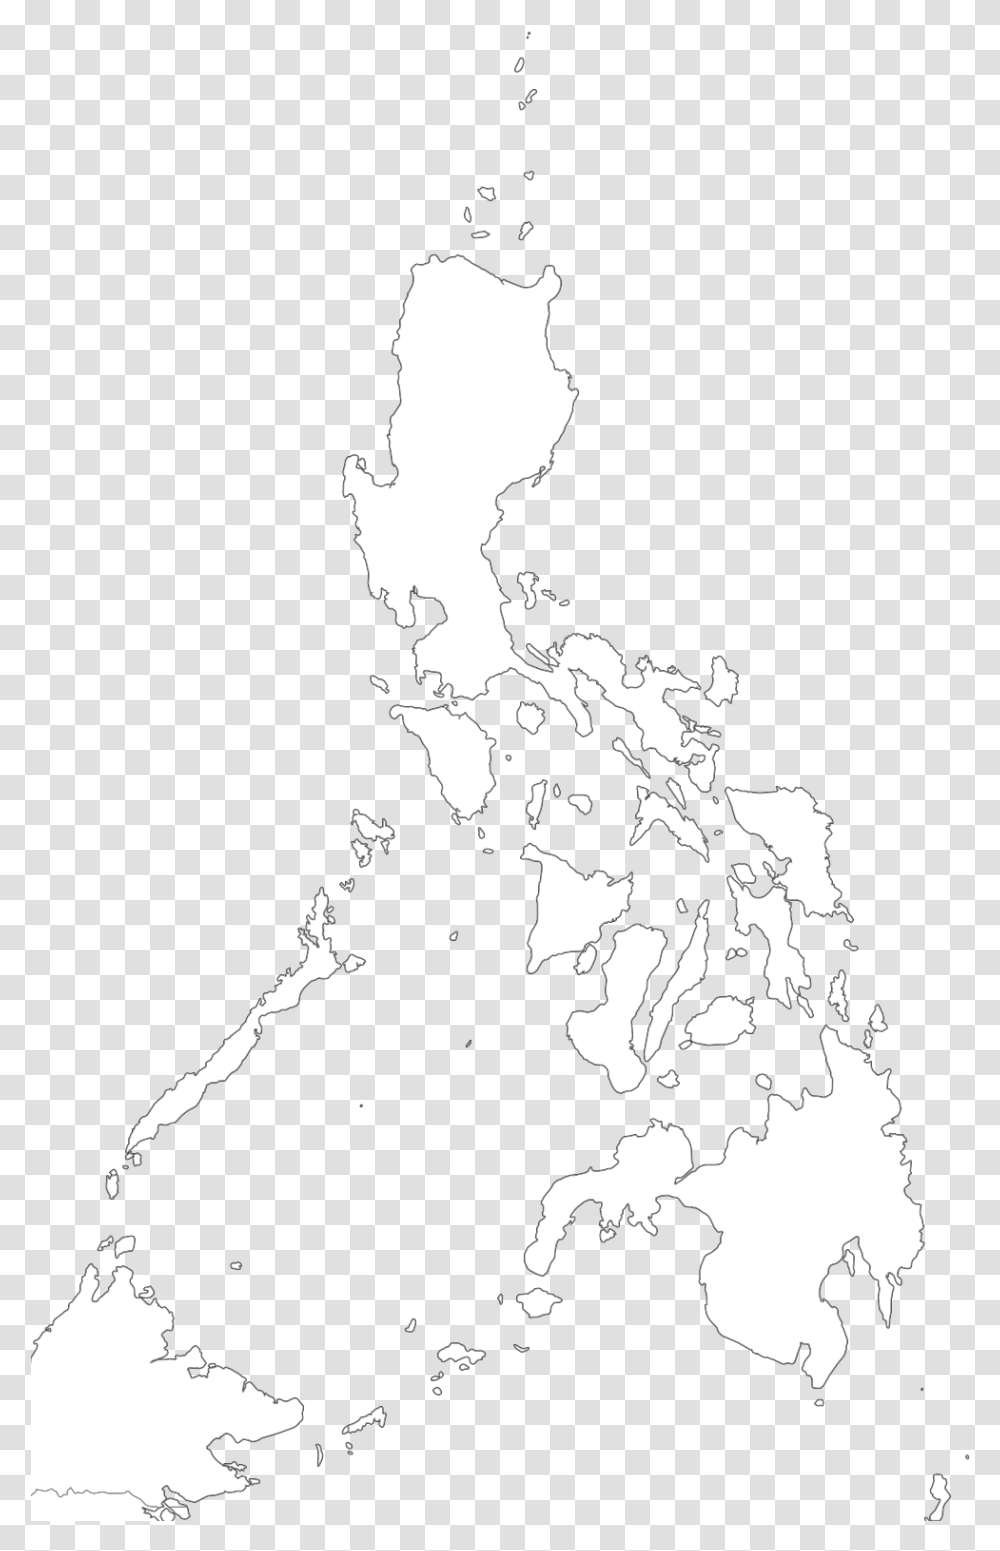 Click To View The Full Size Image Black Philippine Map, Stencil, Person, Human, Silhouette Transparent Png